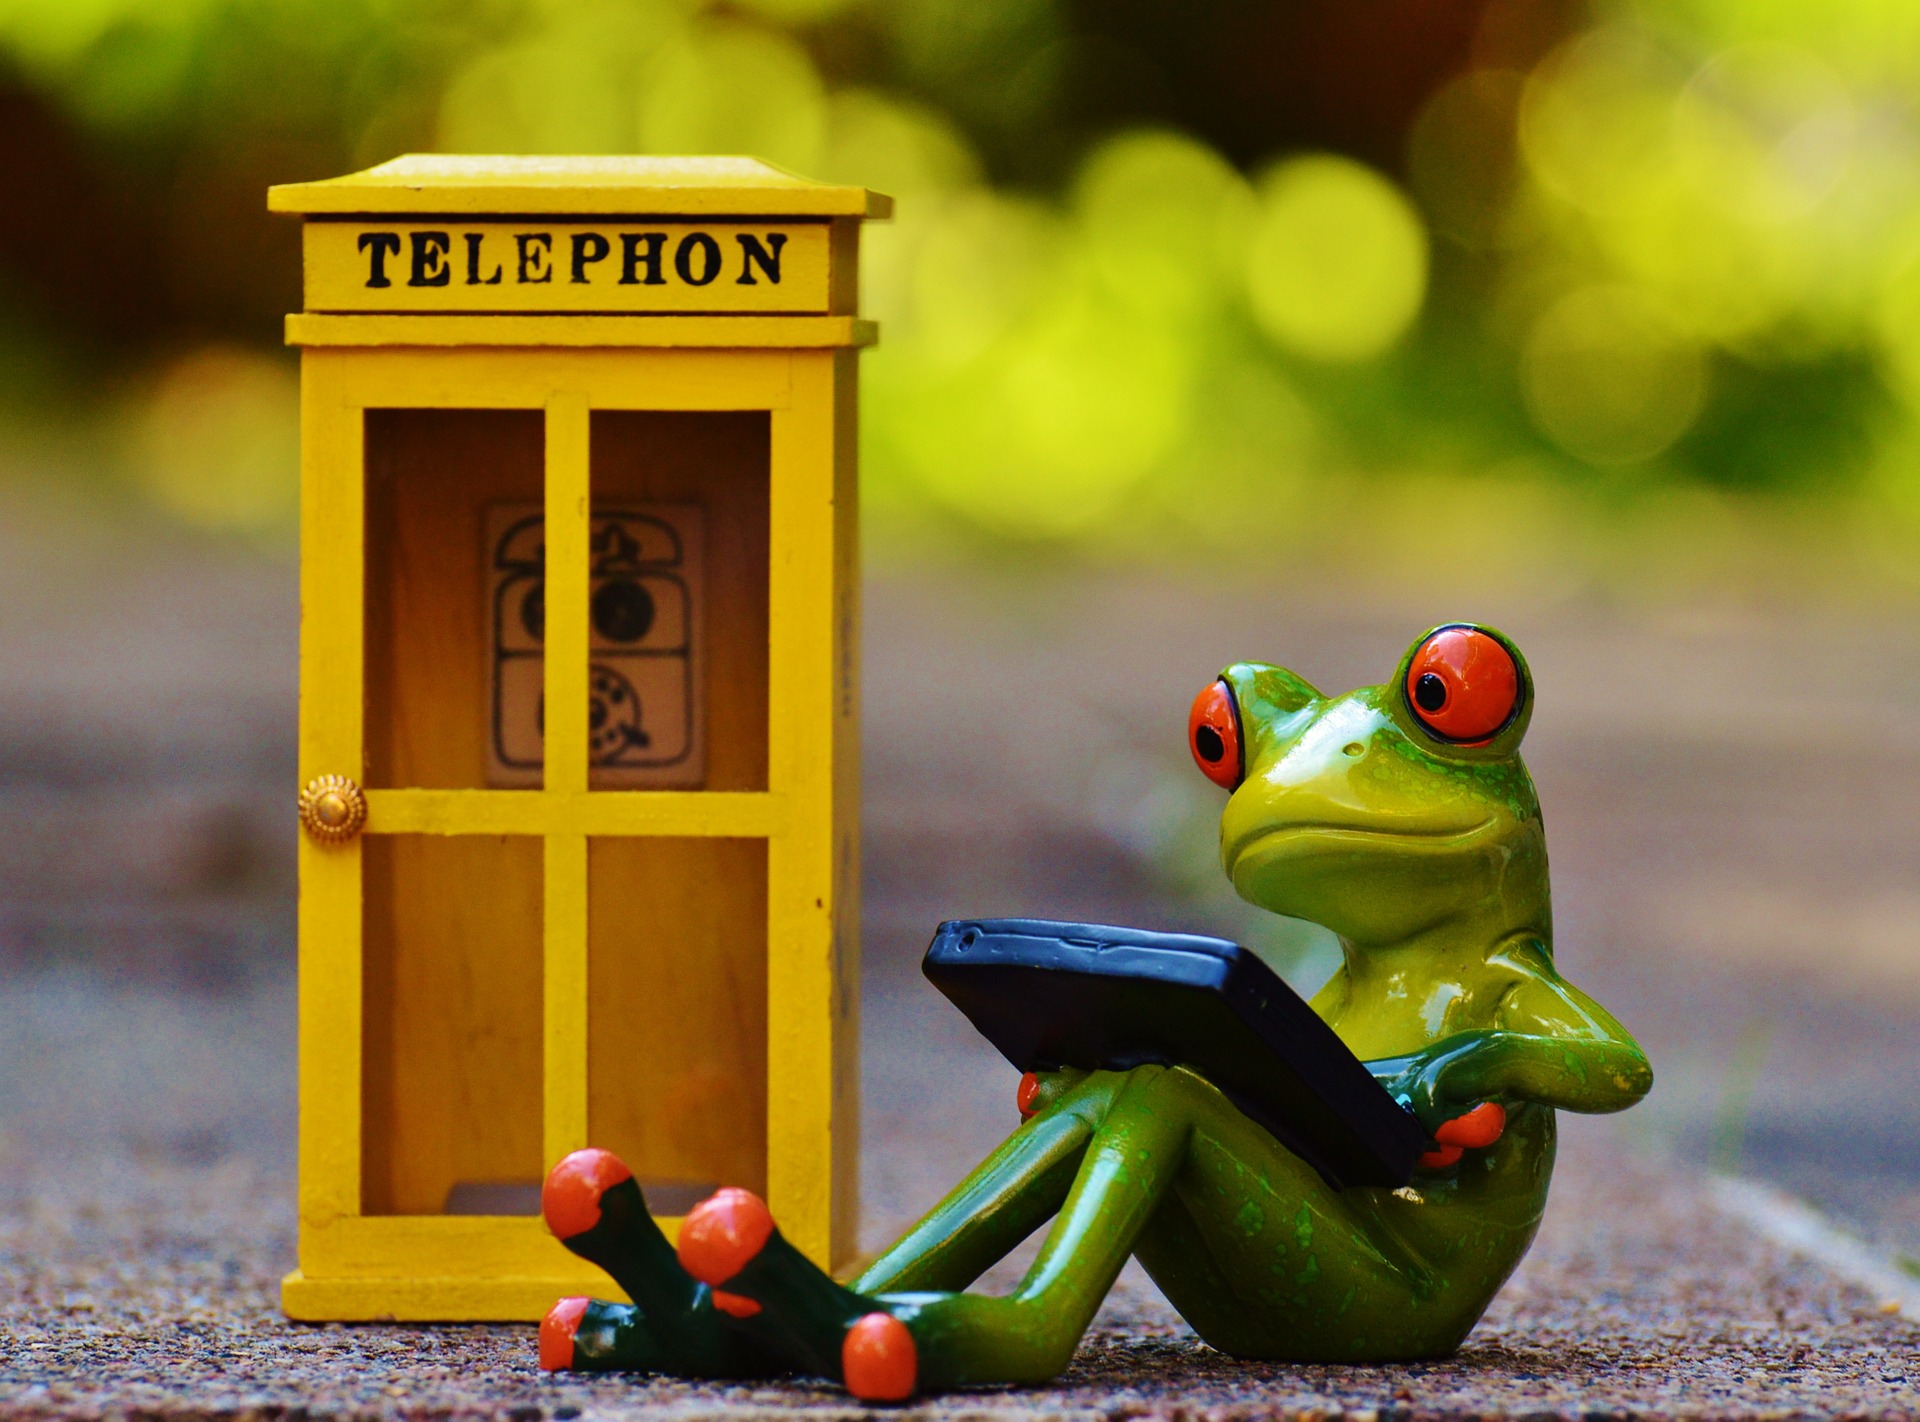 Frog using the phone